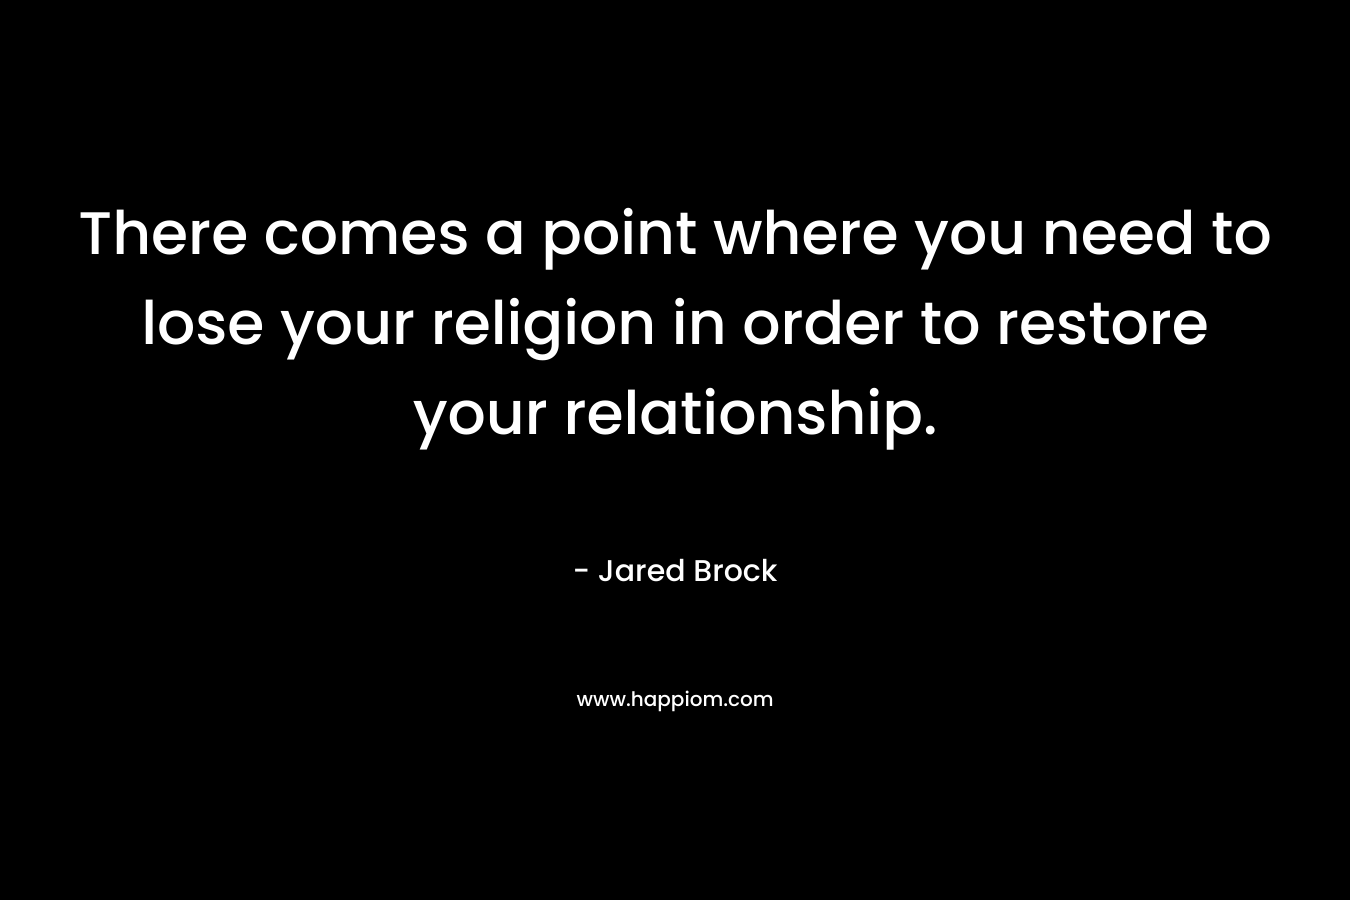 There comes a point where you need to lose your religion in order to restore your relationship.